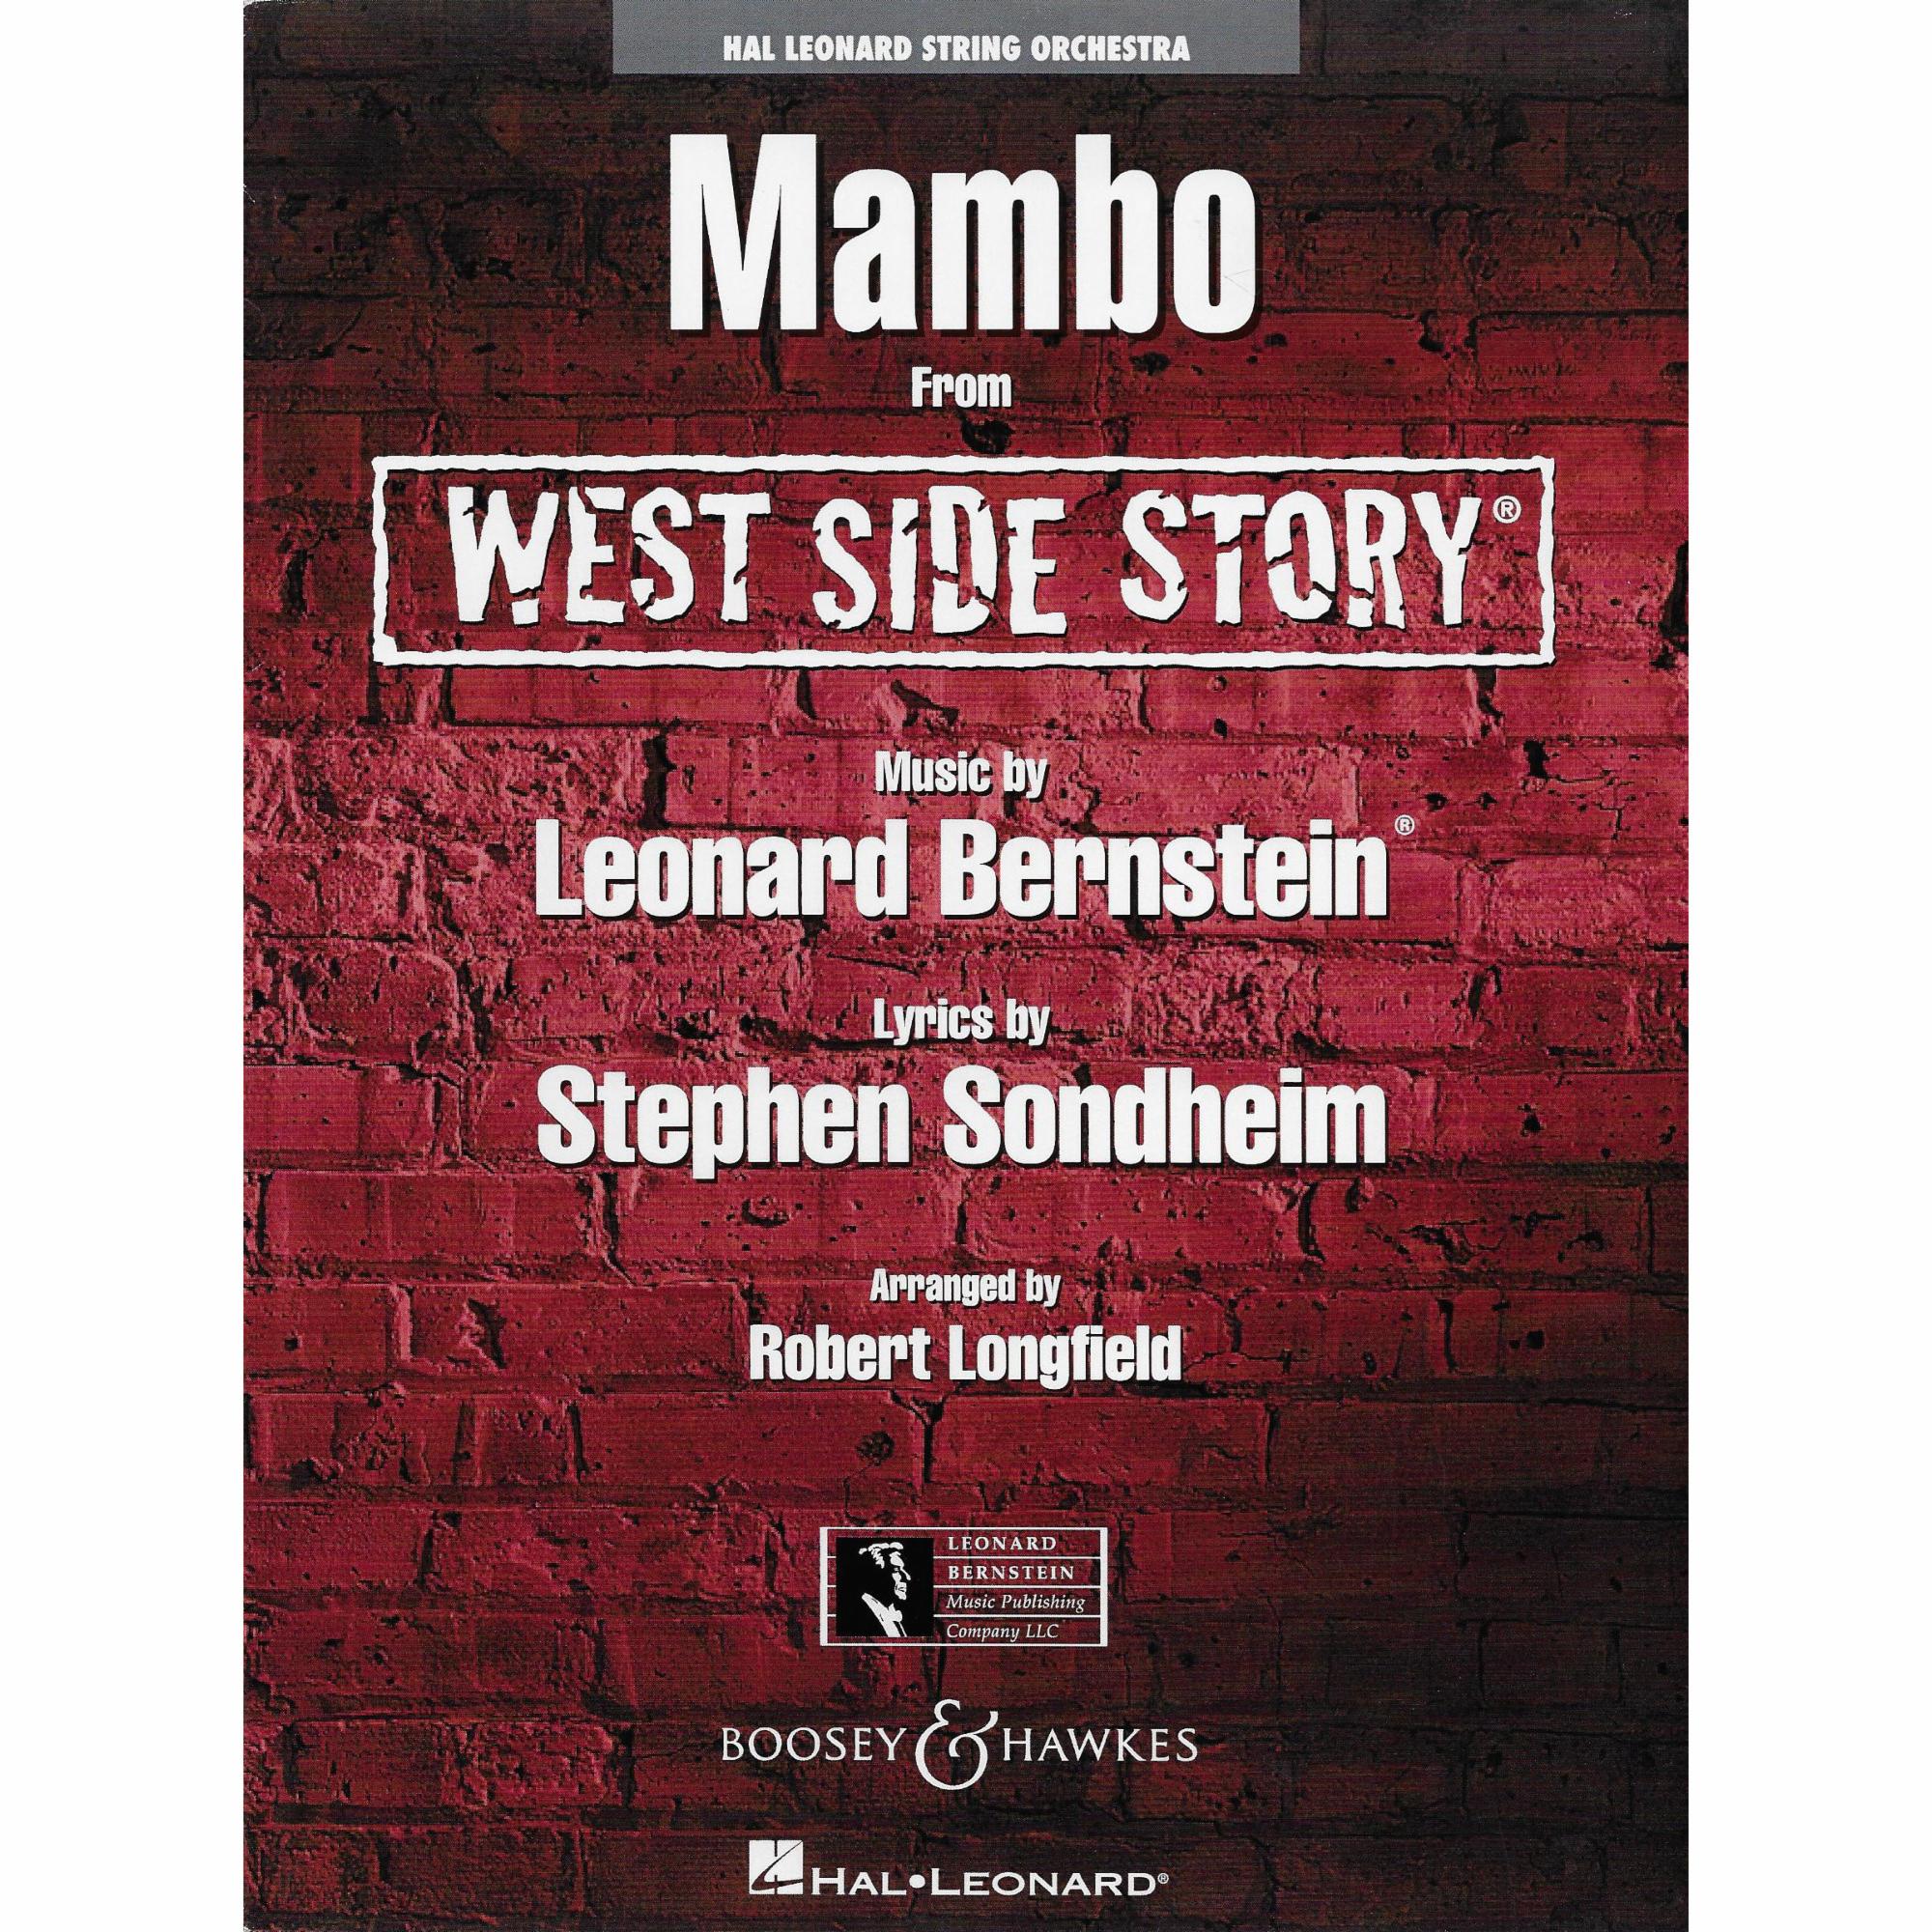 Mambo from West Side Story for String Orchestra